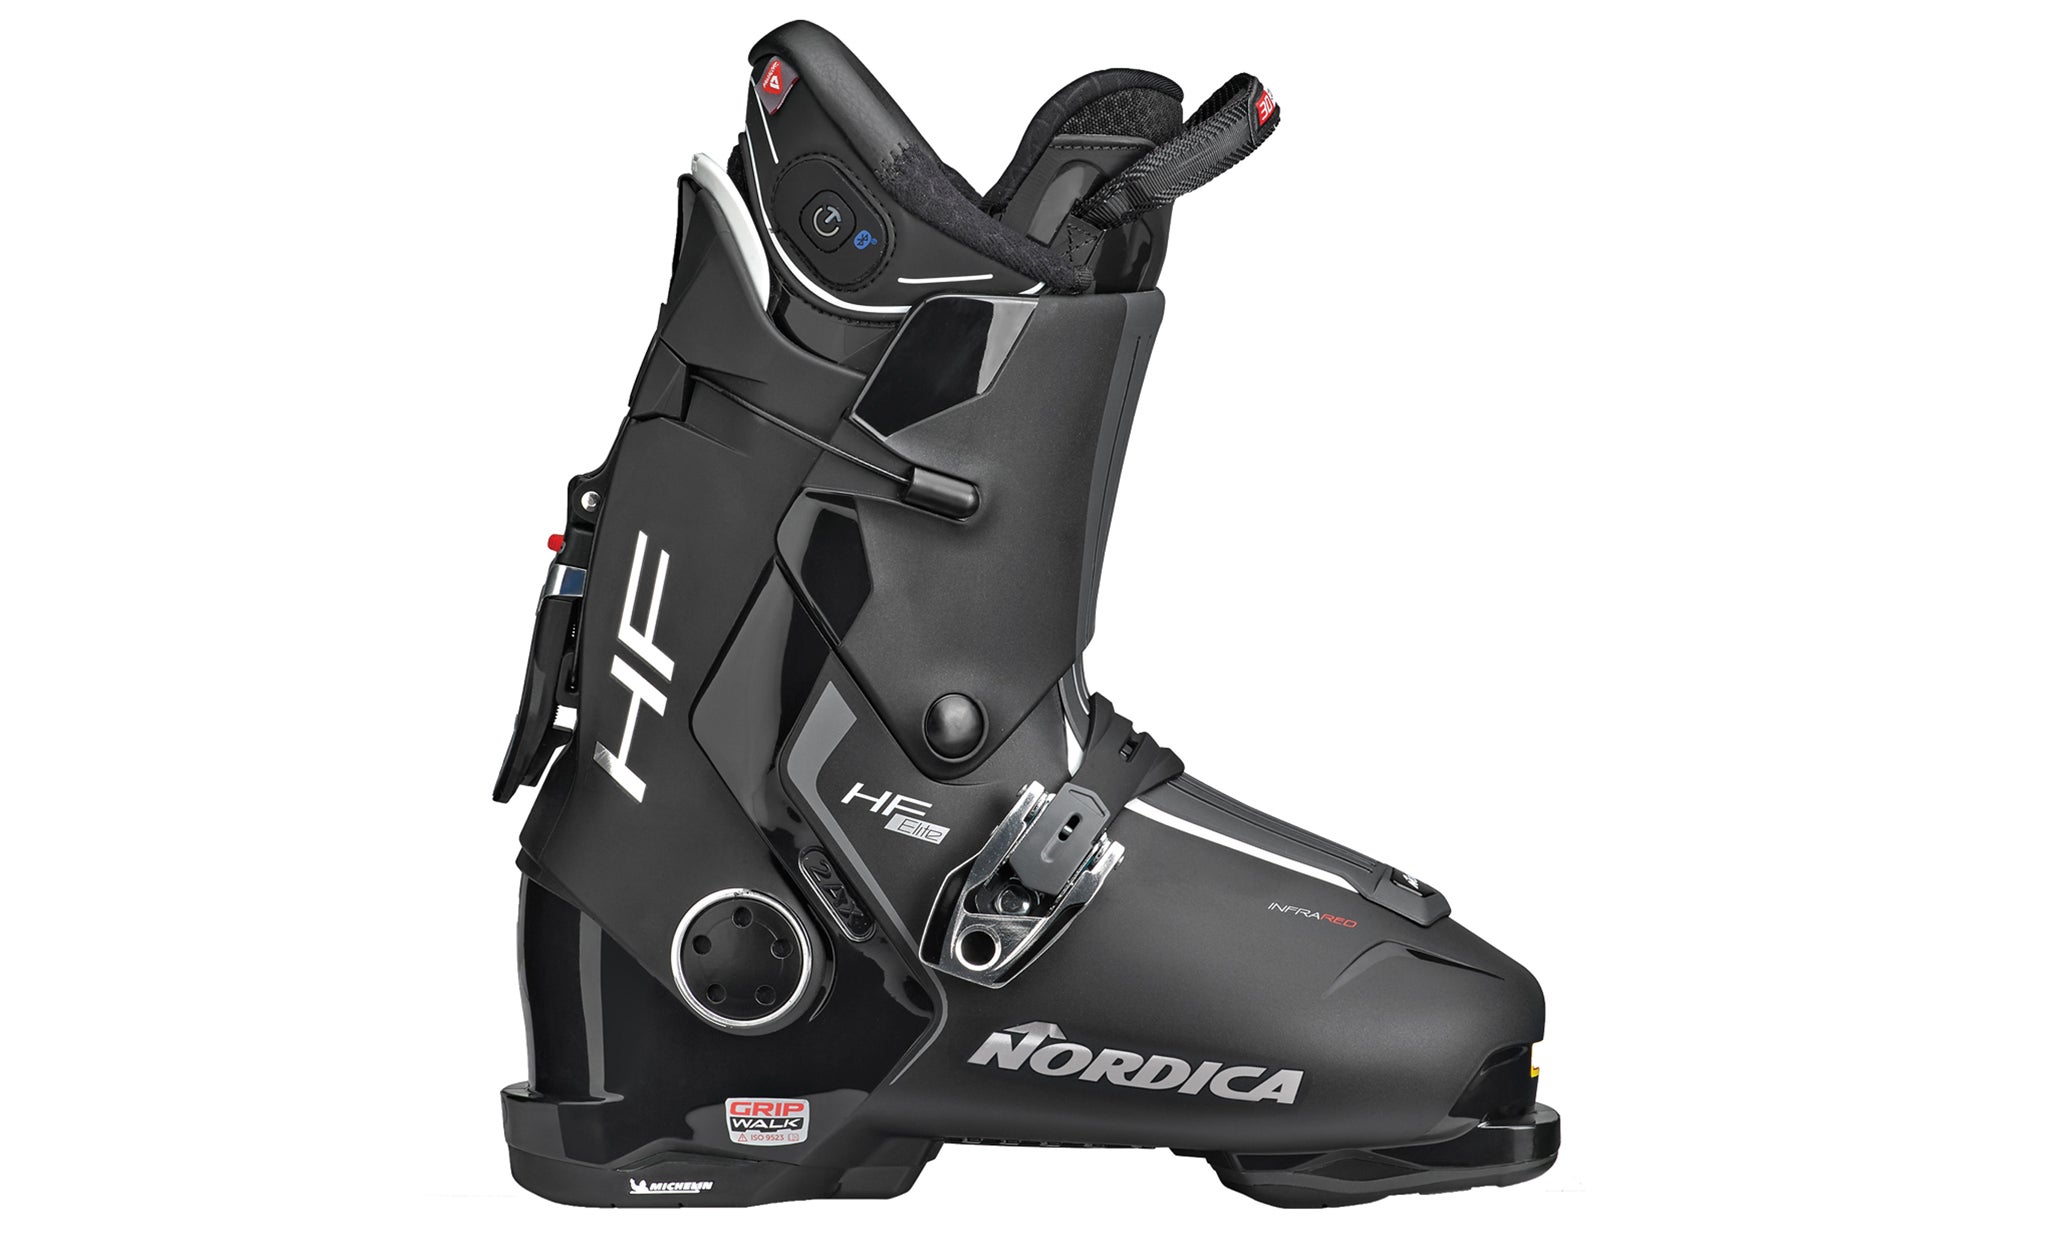 Performance and Comfort: Men's Ski Boots for Unforgettable Skiing